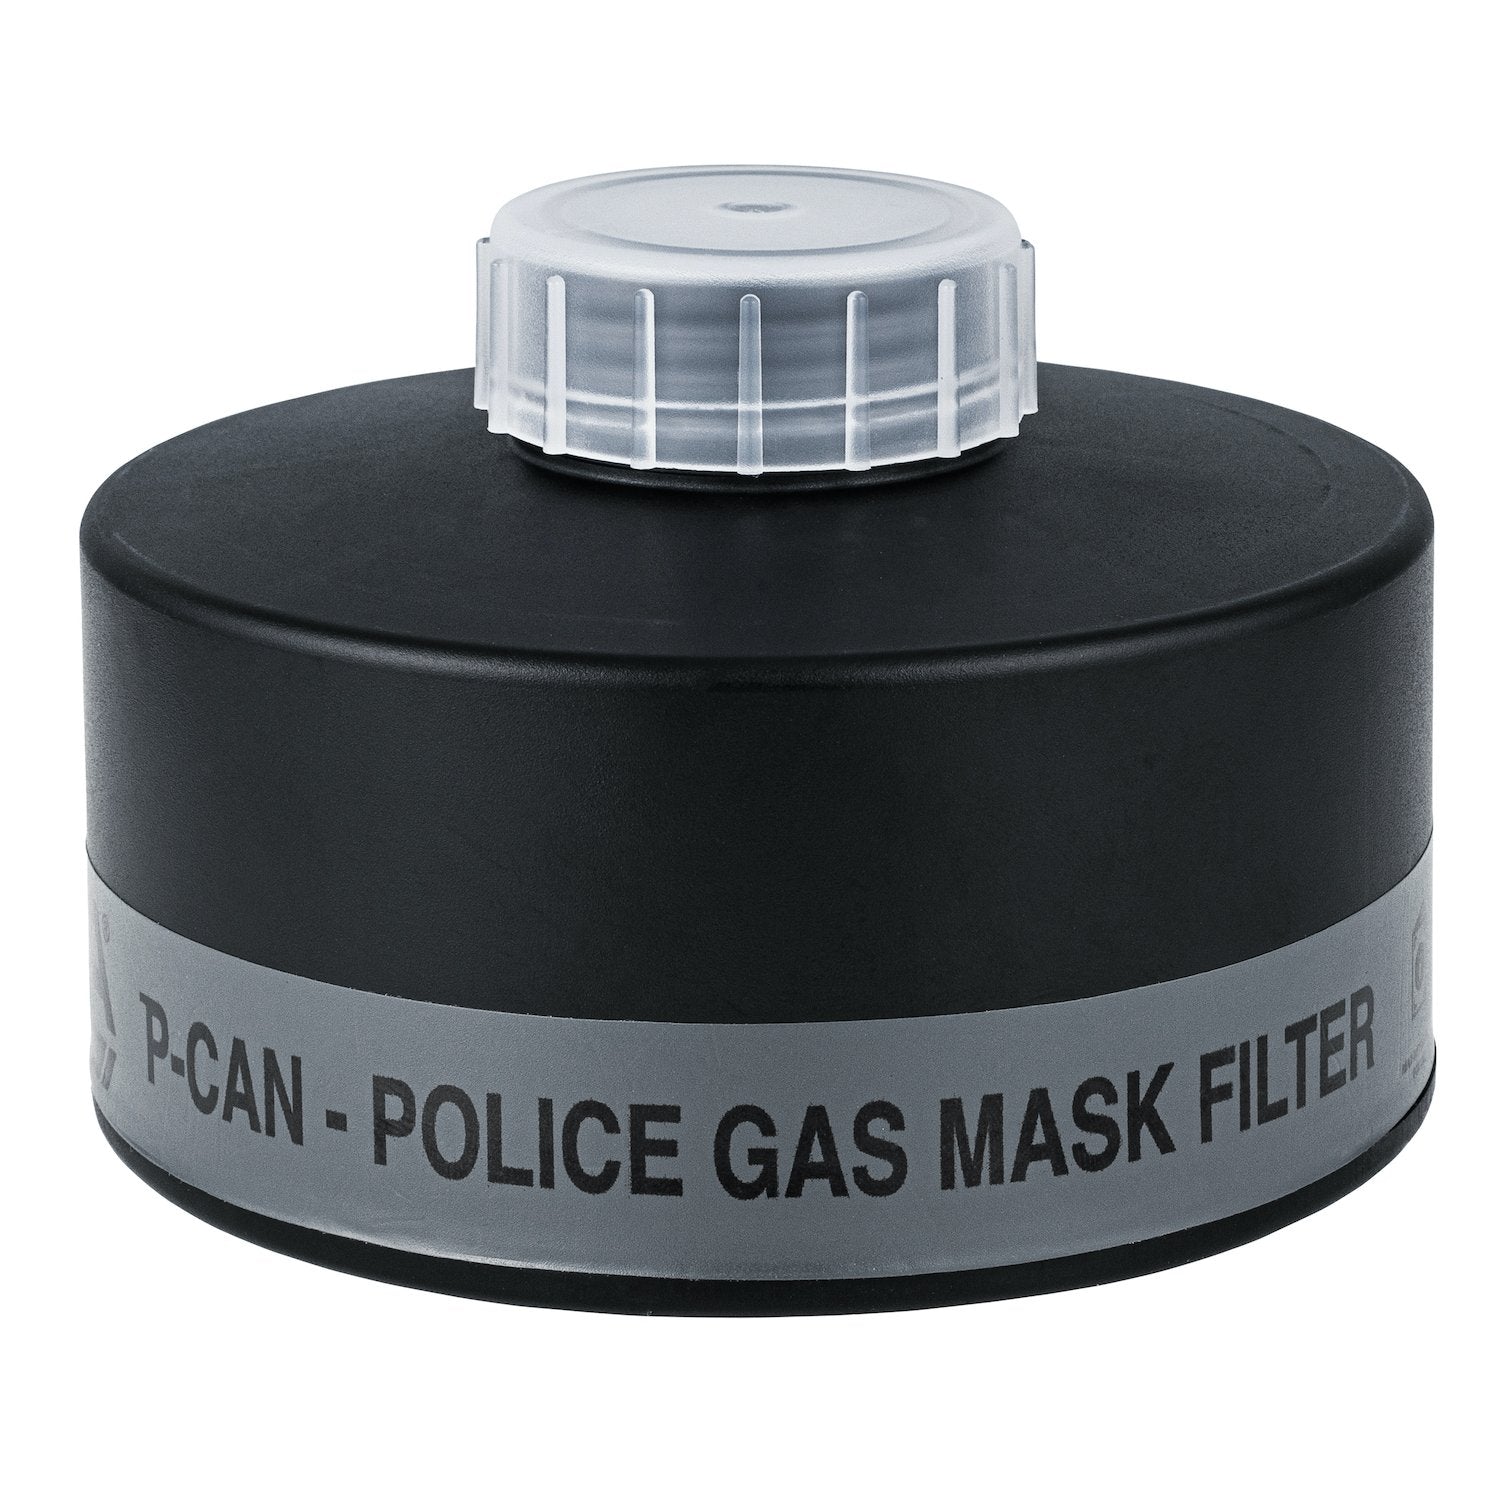 Mira Safety P-CAN Police and Corrections Gas Mask Filter Protective Gear MIRA Safety Tactical Gear Supplier Tactical Distributors Australia